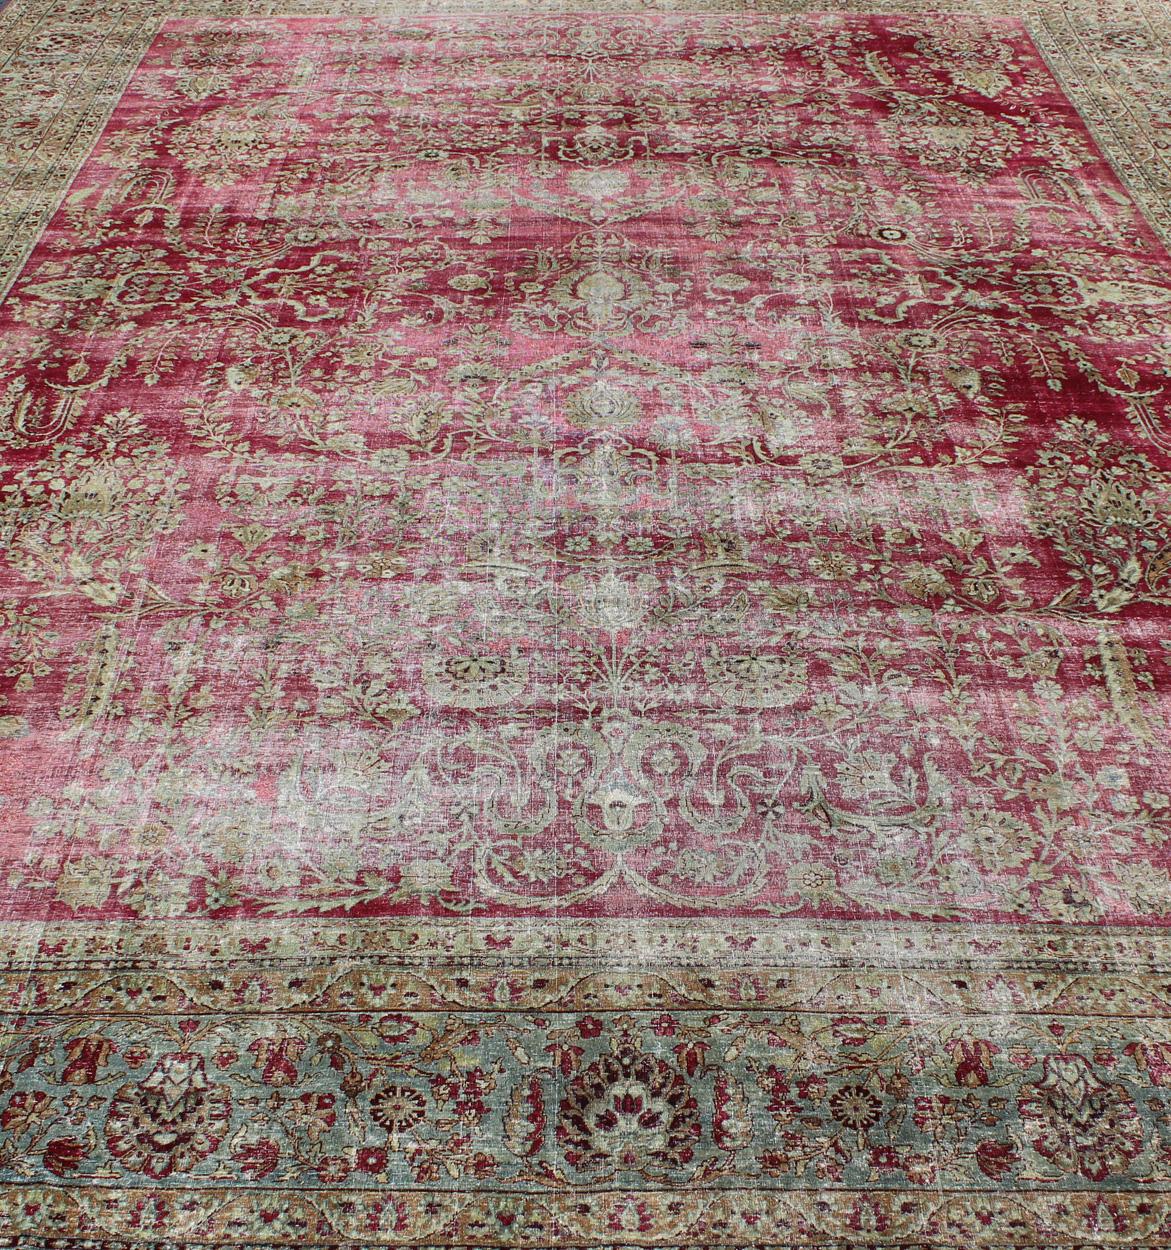 Distressed Antique Persian Lavar Kerman Rug in All-Over Intricate Floral Design For Sale 4